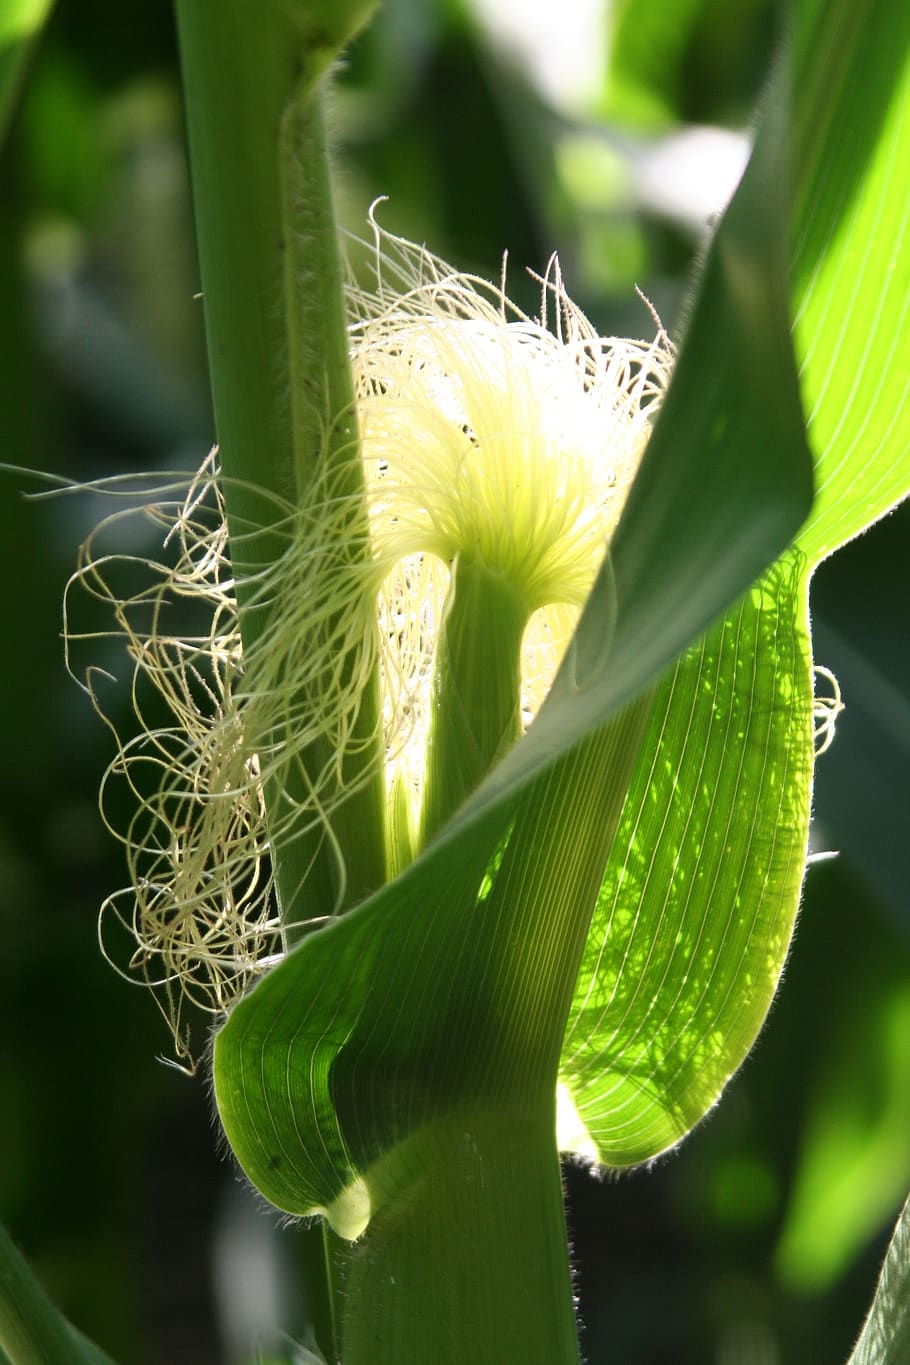 leaf, corn, nature, agriculture, field, summer, beard, rod, transparency, plant